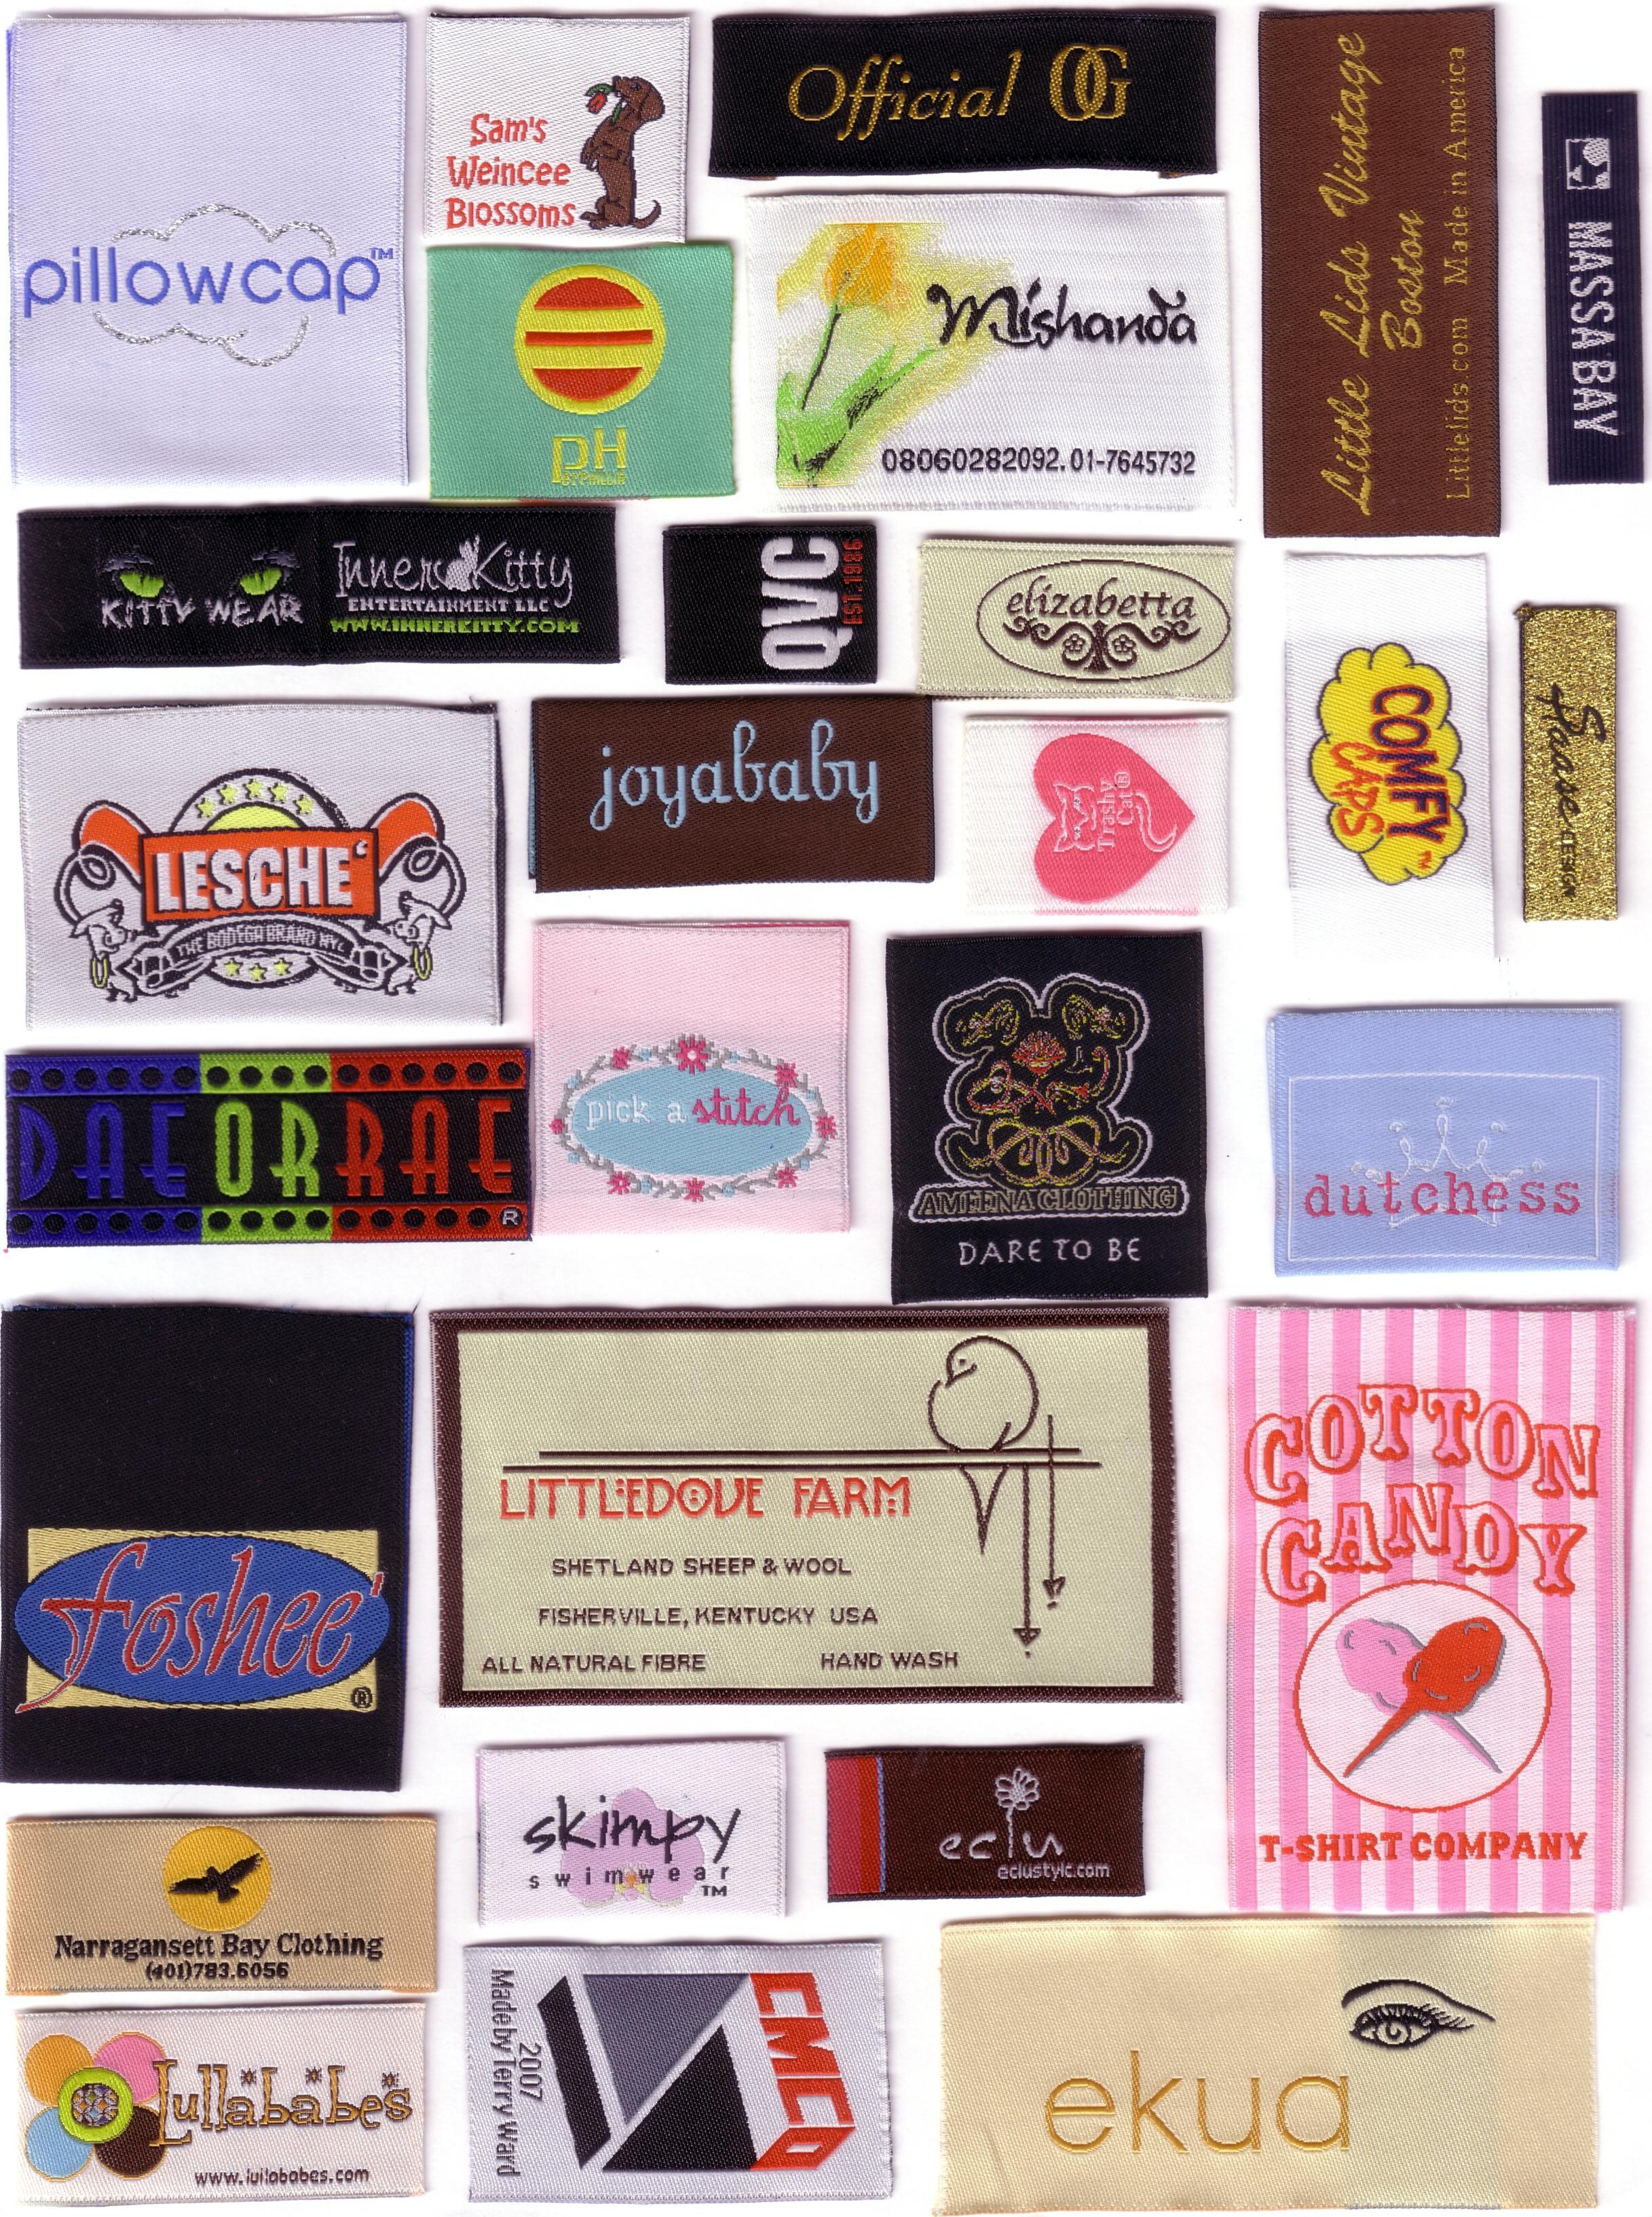 Woven labels - add more value to your products!
